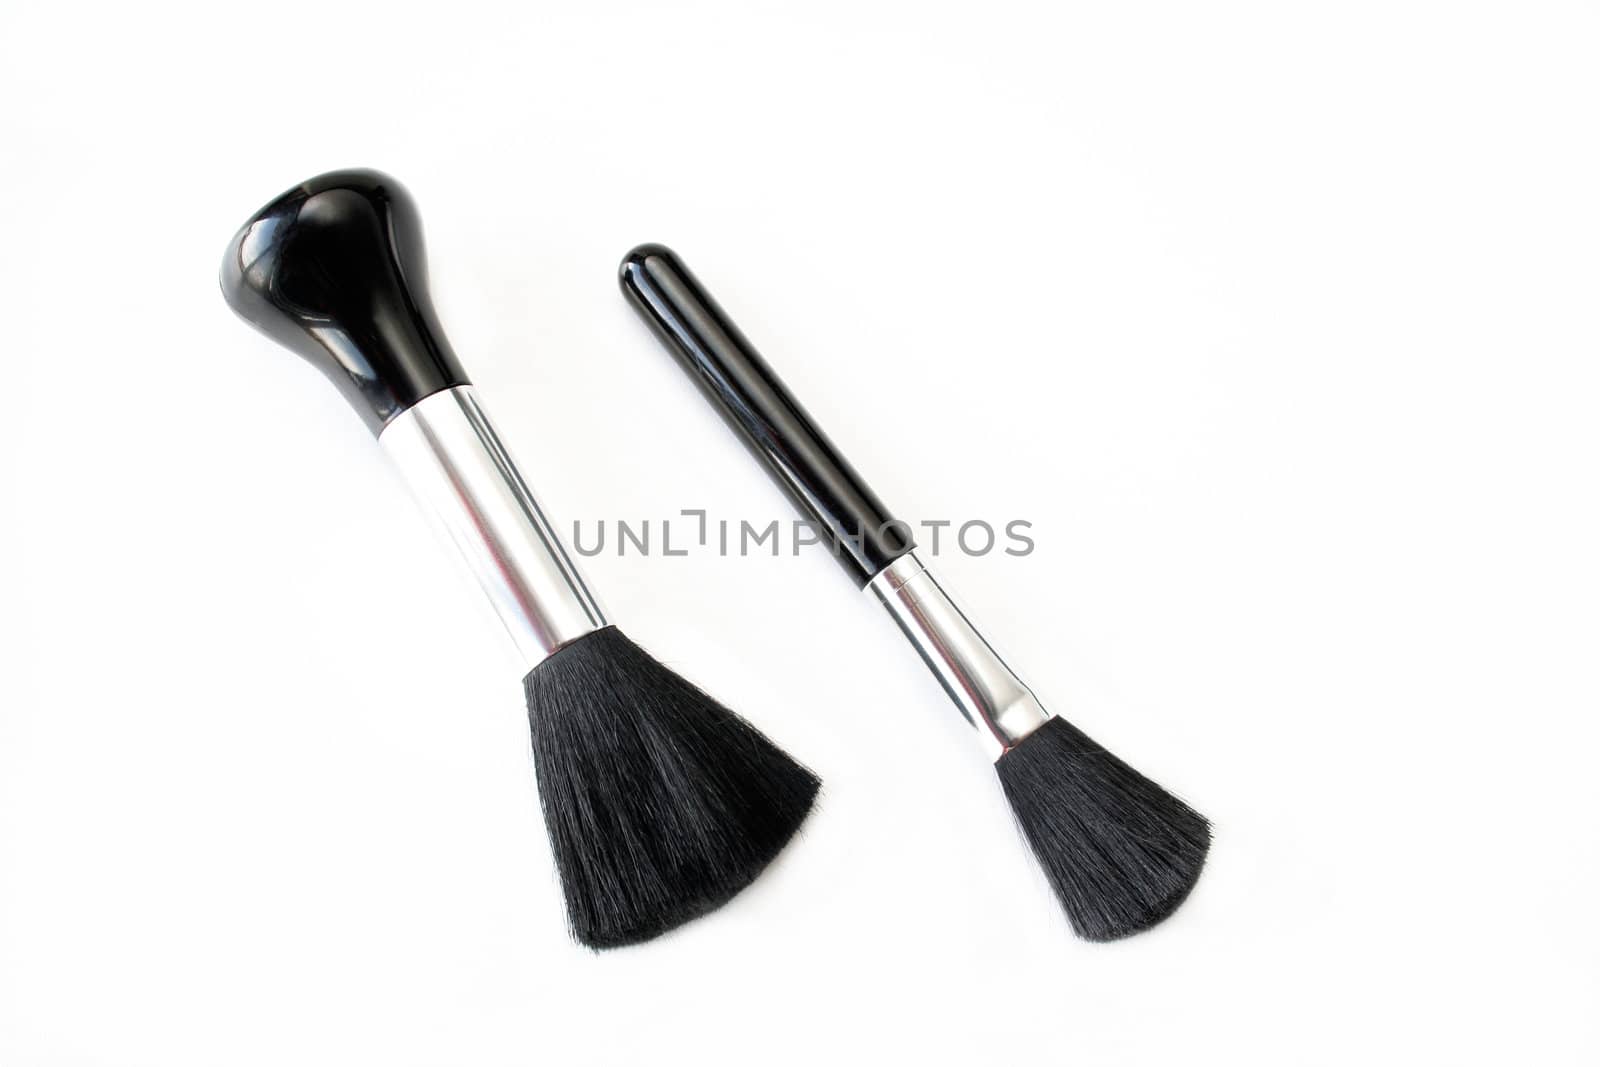 Two makeup brushes on a white background with copy space available.